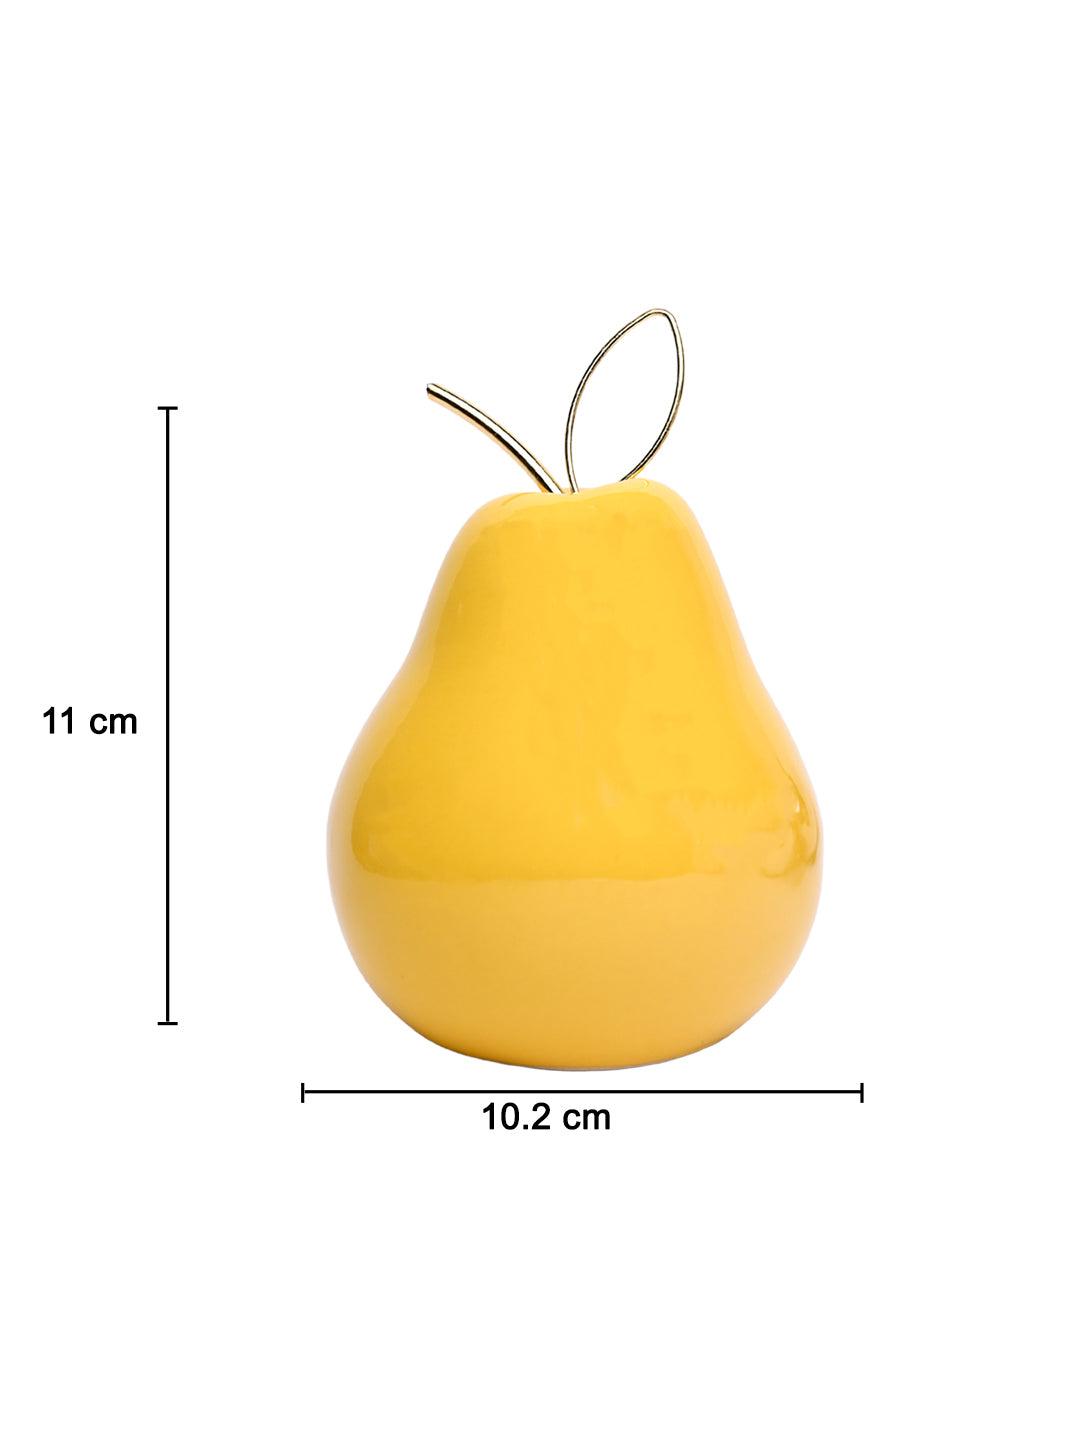 Decorative Ceramic Yellow Pear With Leaf - MARKET 99